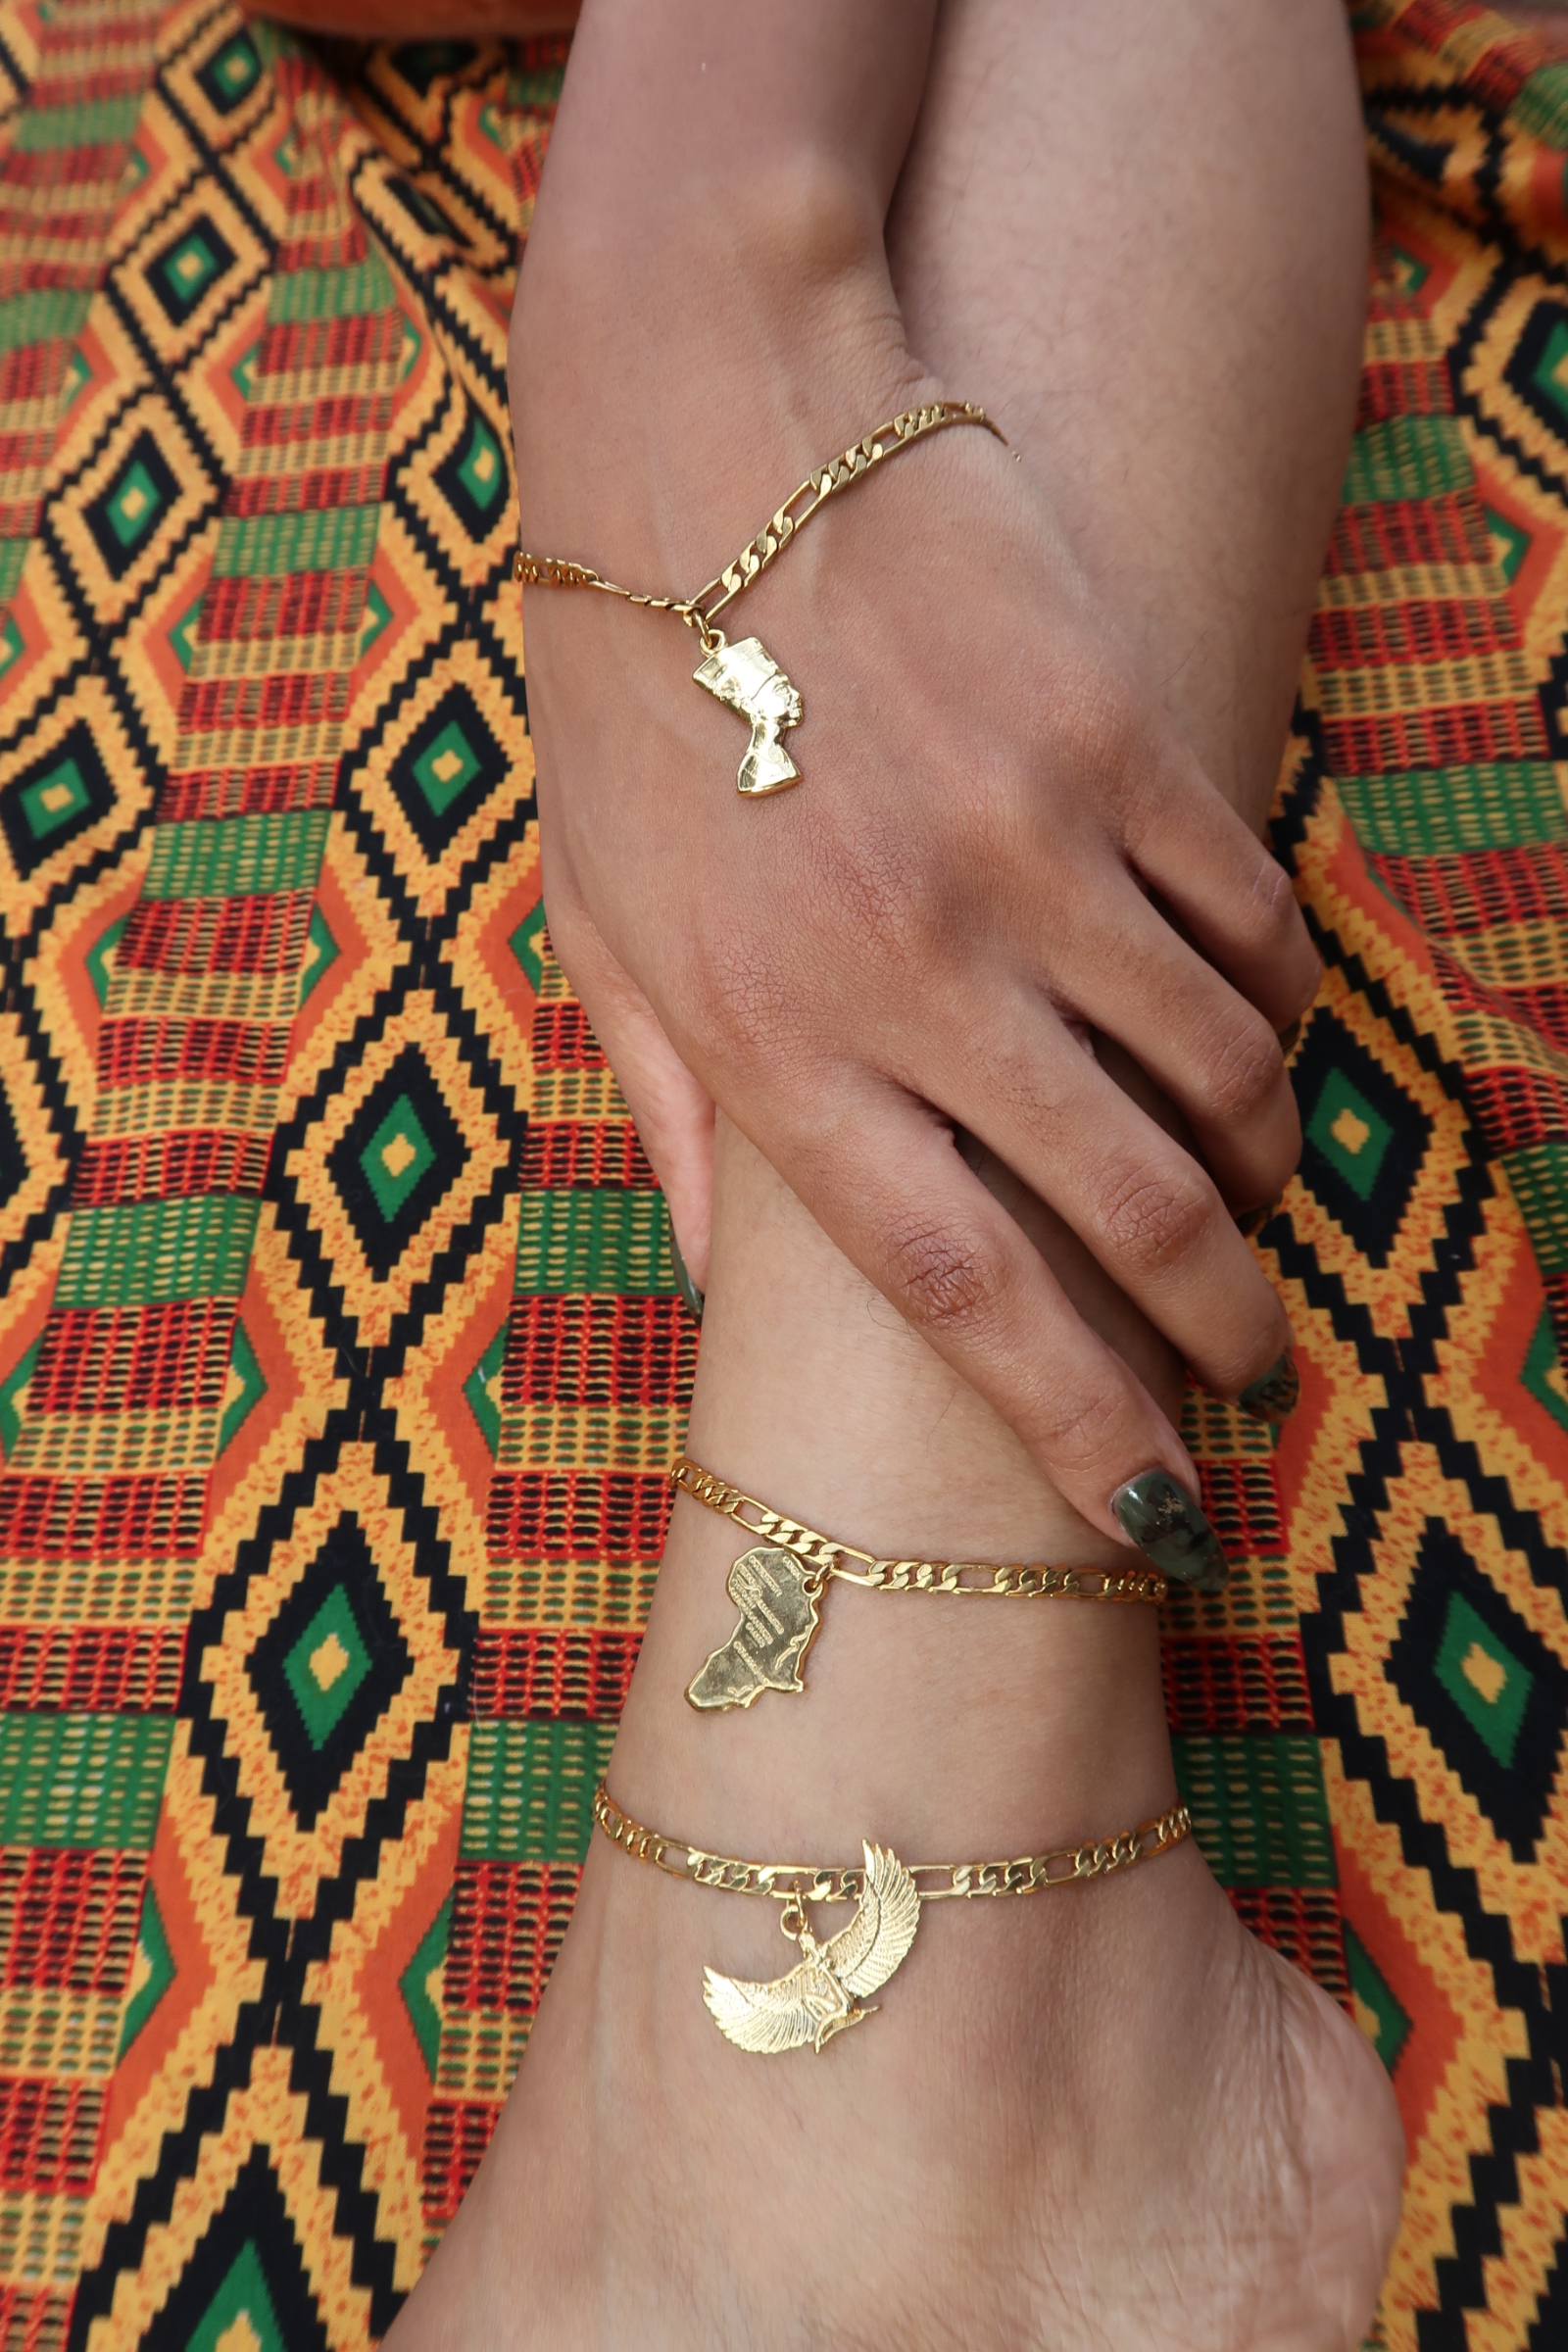 Queen of The Nile Anklet and Bracelet | Three Hoodoo Sisters